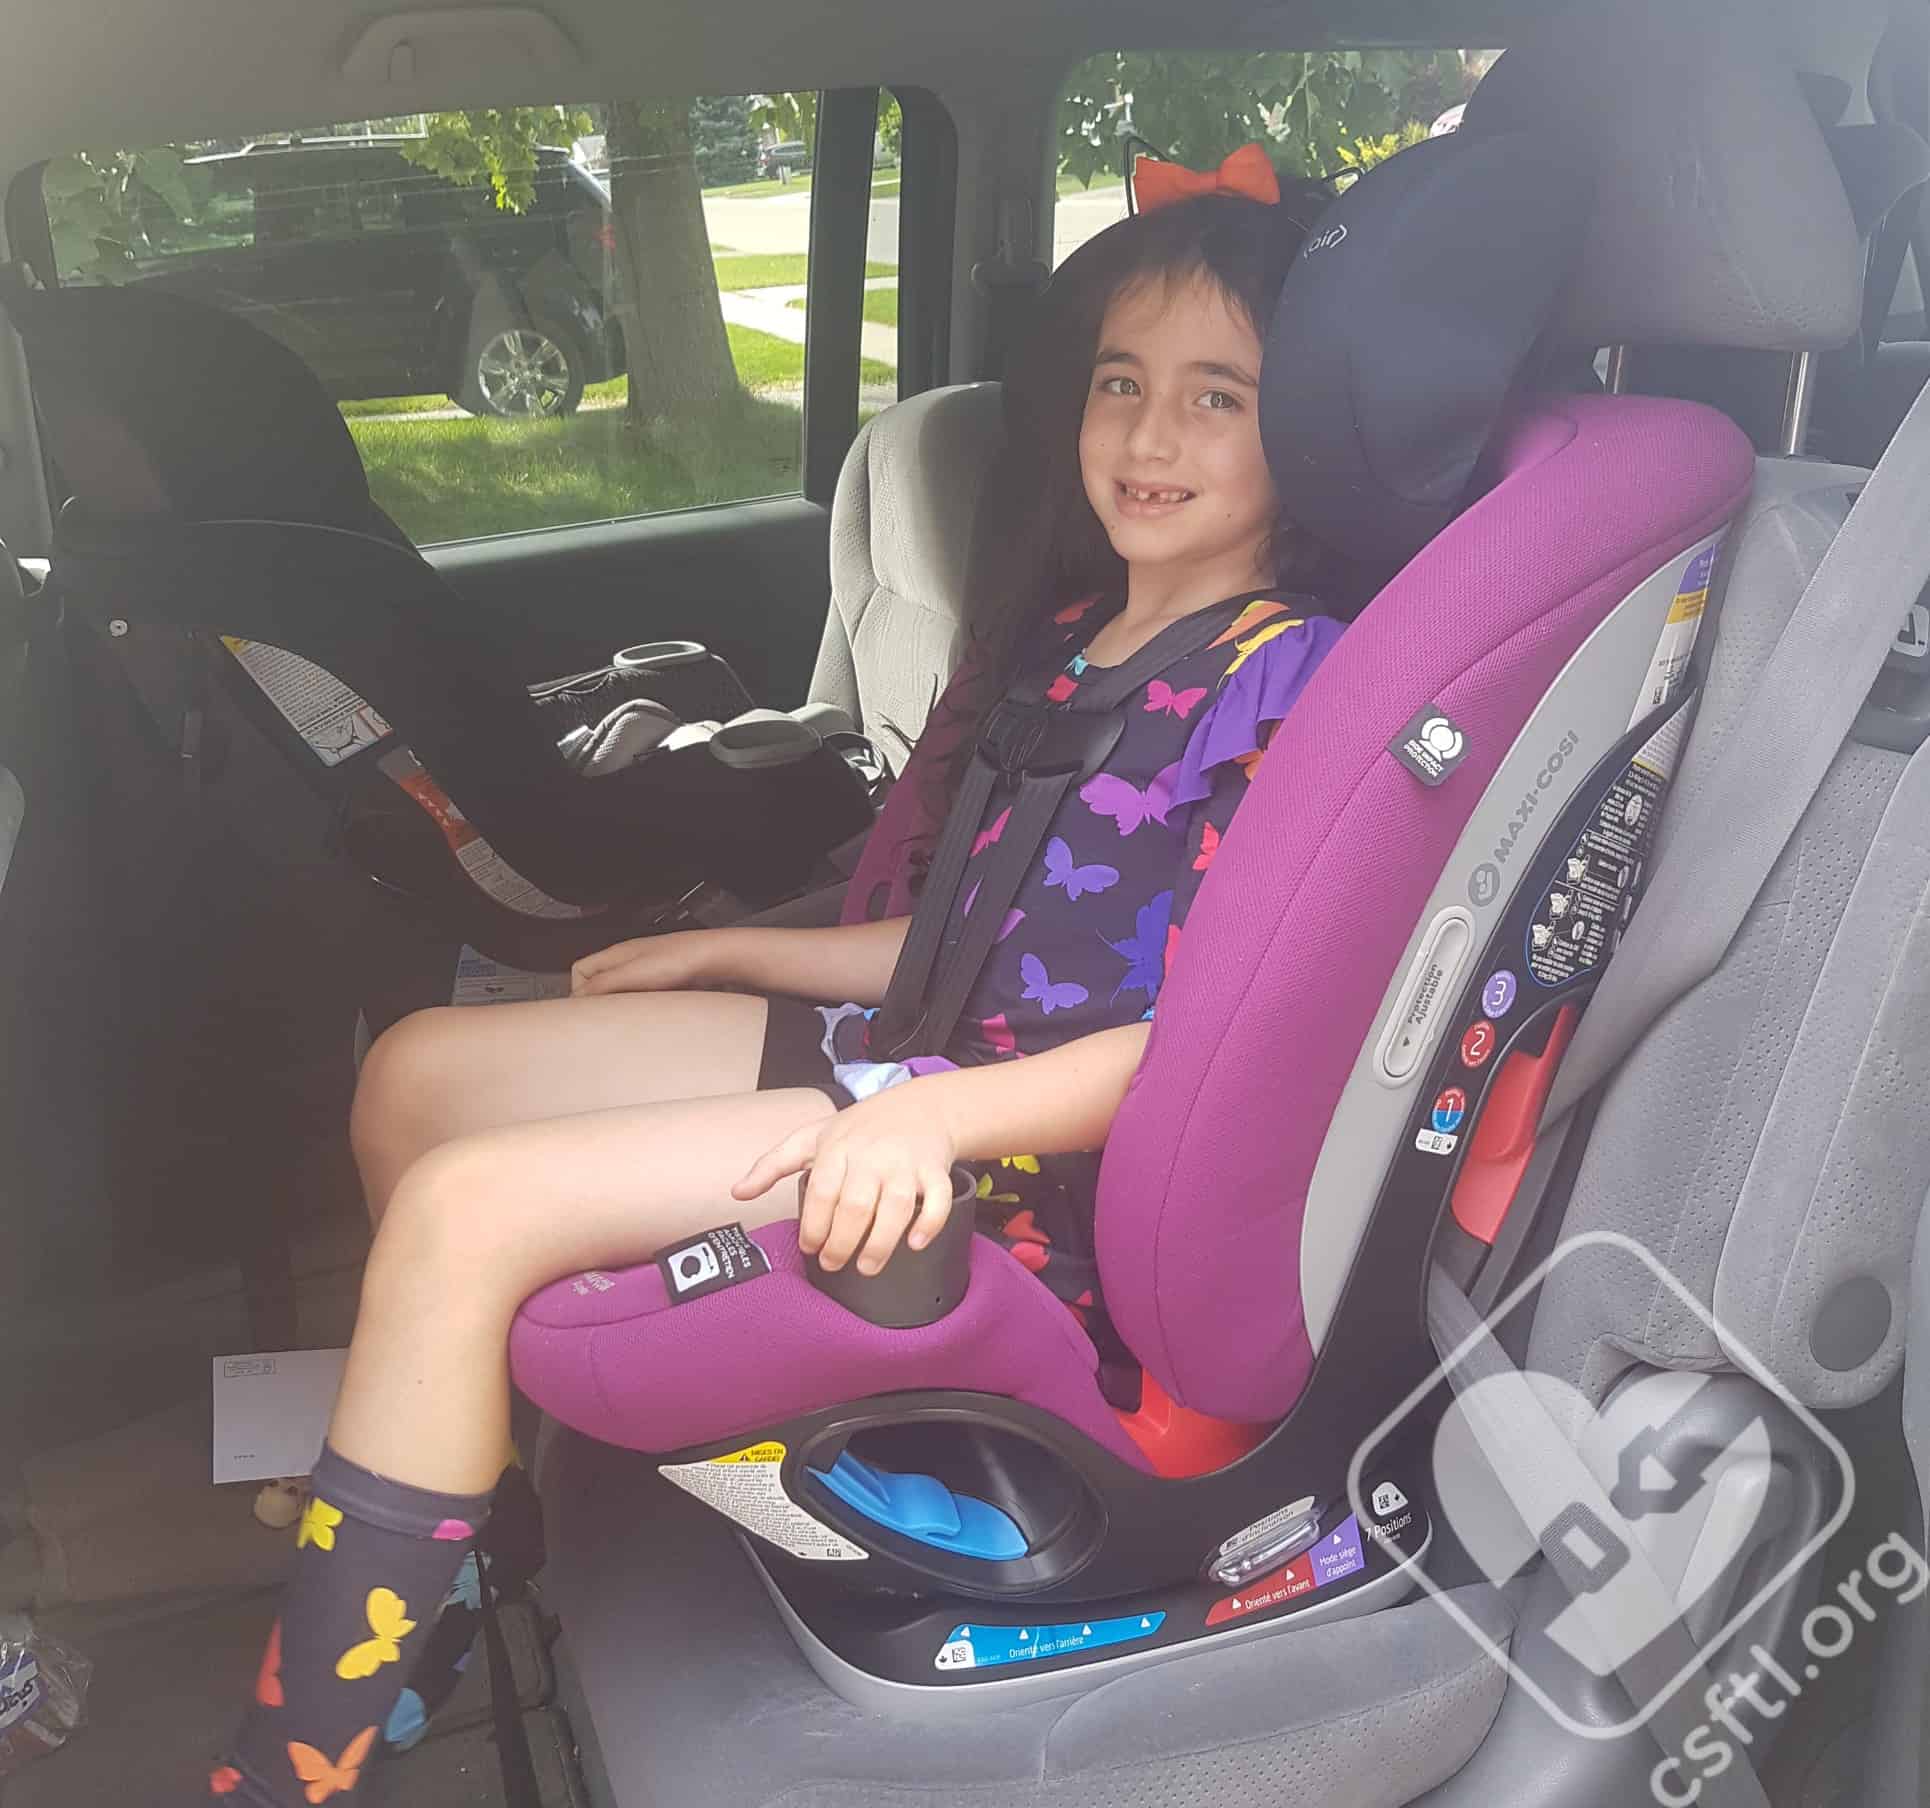 Maxi Cosi Magellan Review Canada, Car Seat For 12 Year Old